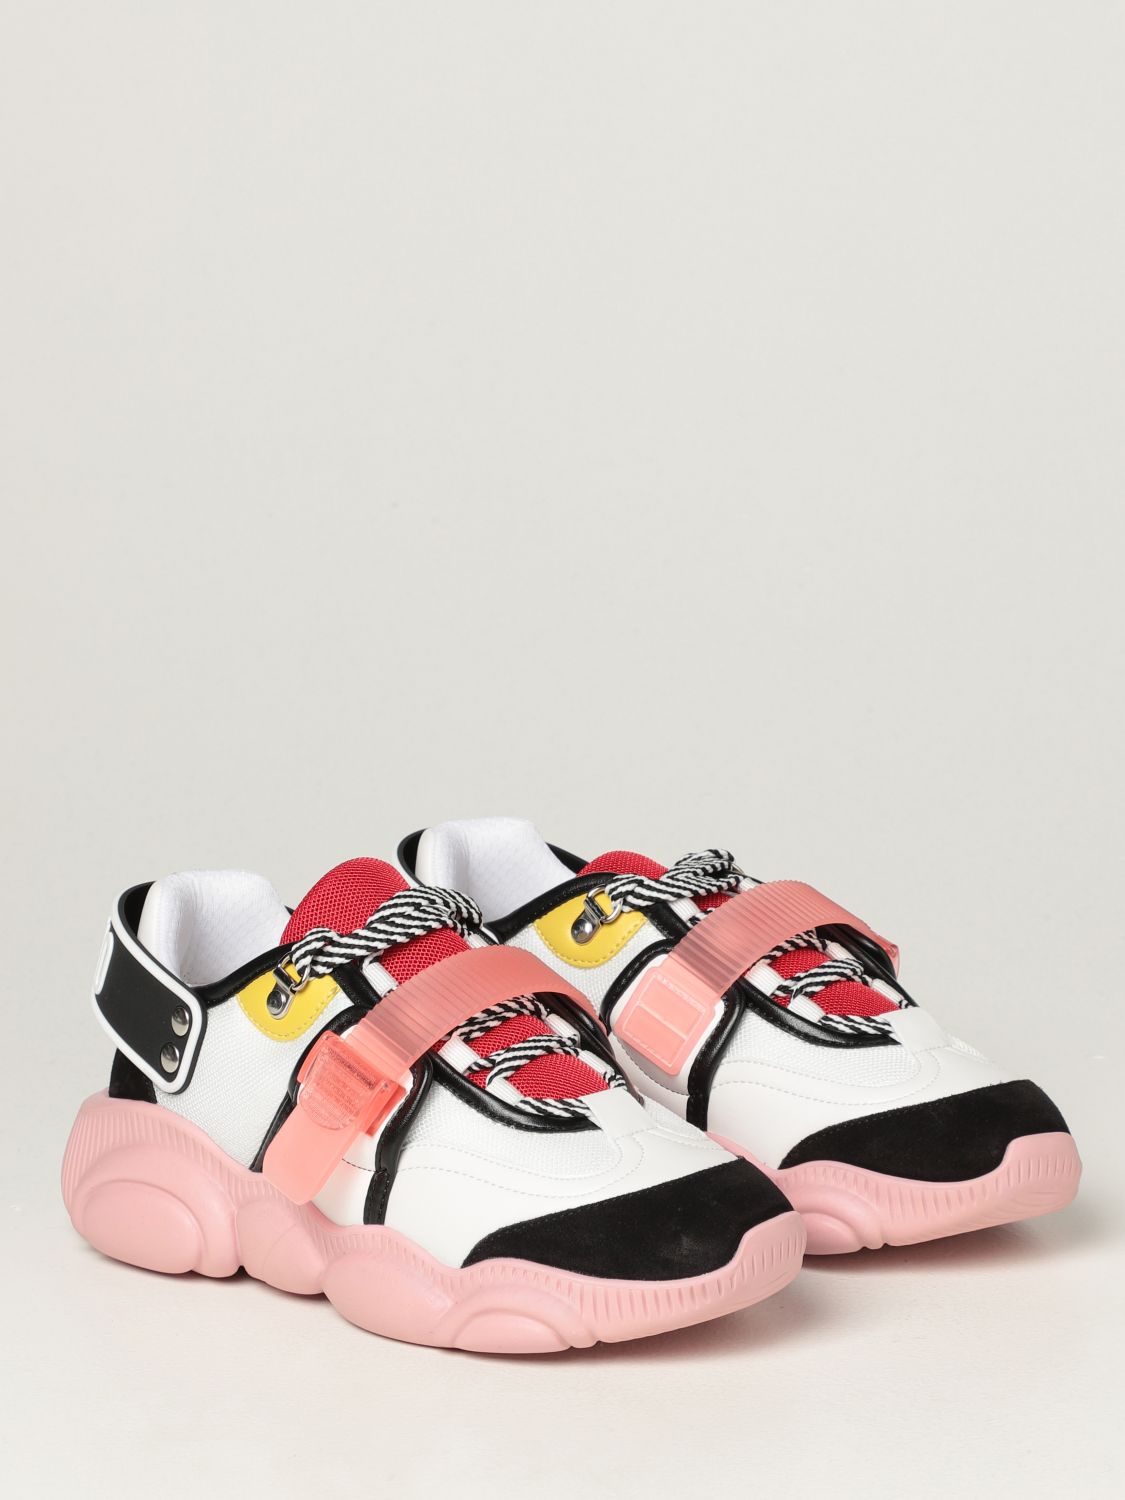 Sneakers Moschino Couture: Roller Skates Moschino Couture sneakers with Teddy sole multicolor 2